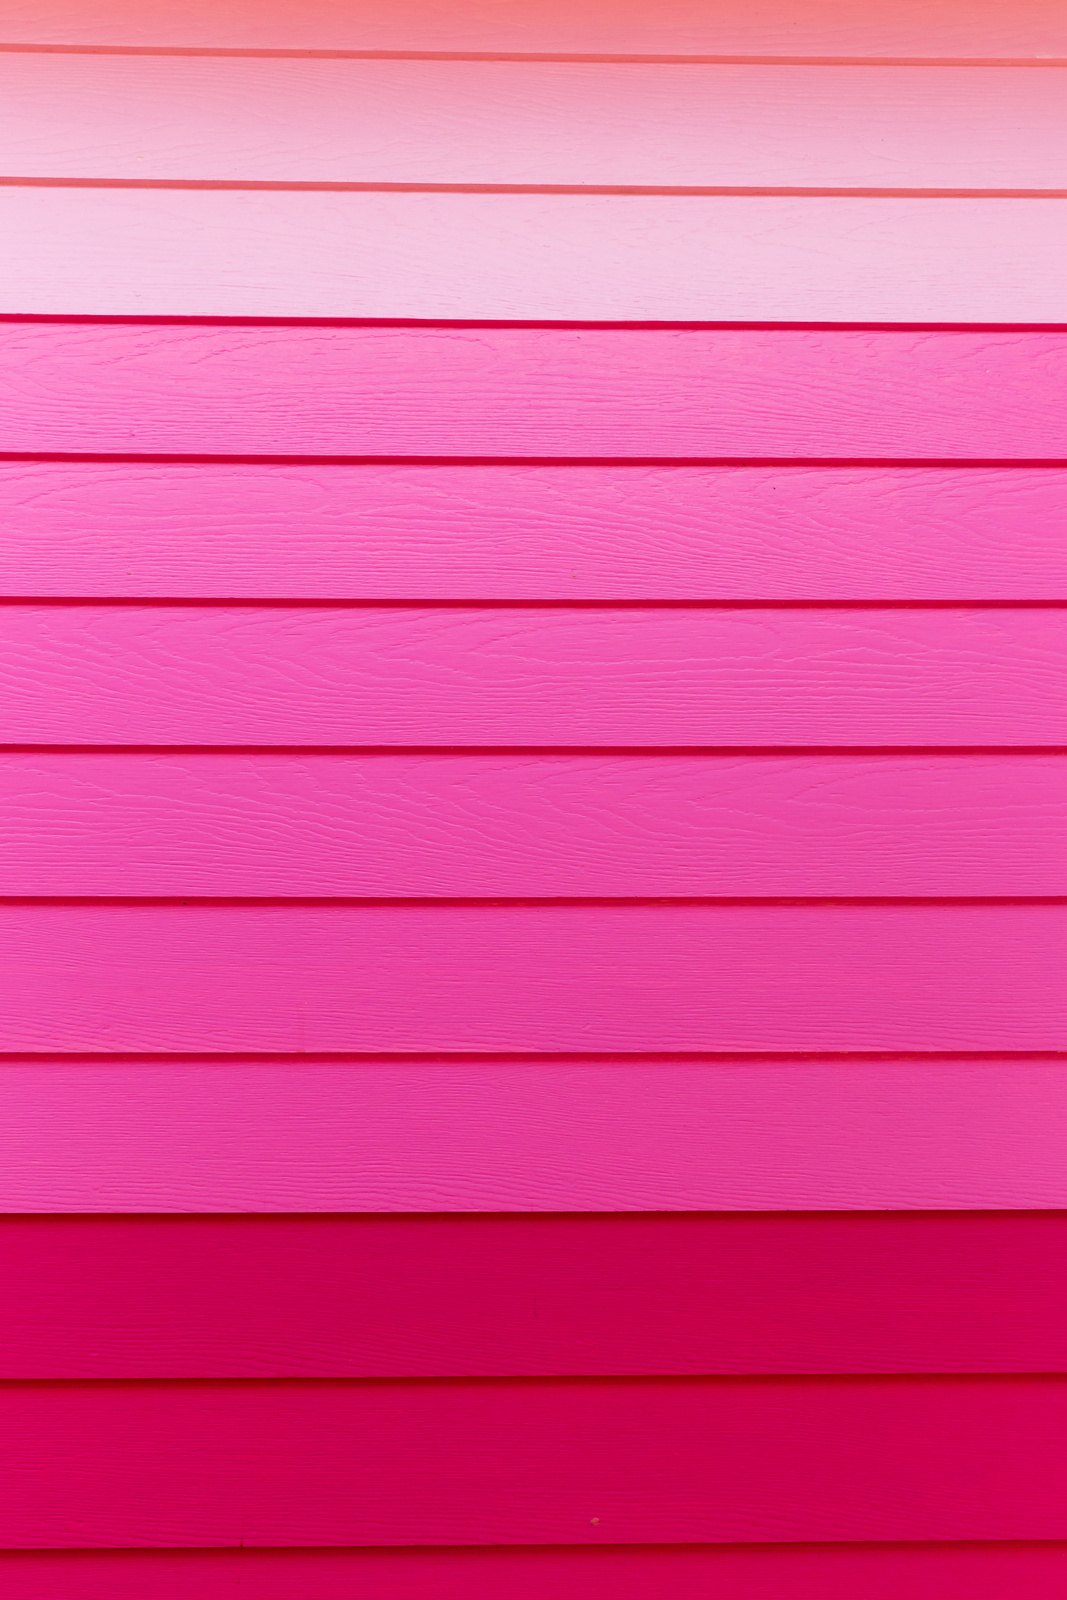 Wood pink background.Pink Synthetic wood wall texture use for background.Colorful wooden board painted in pink.